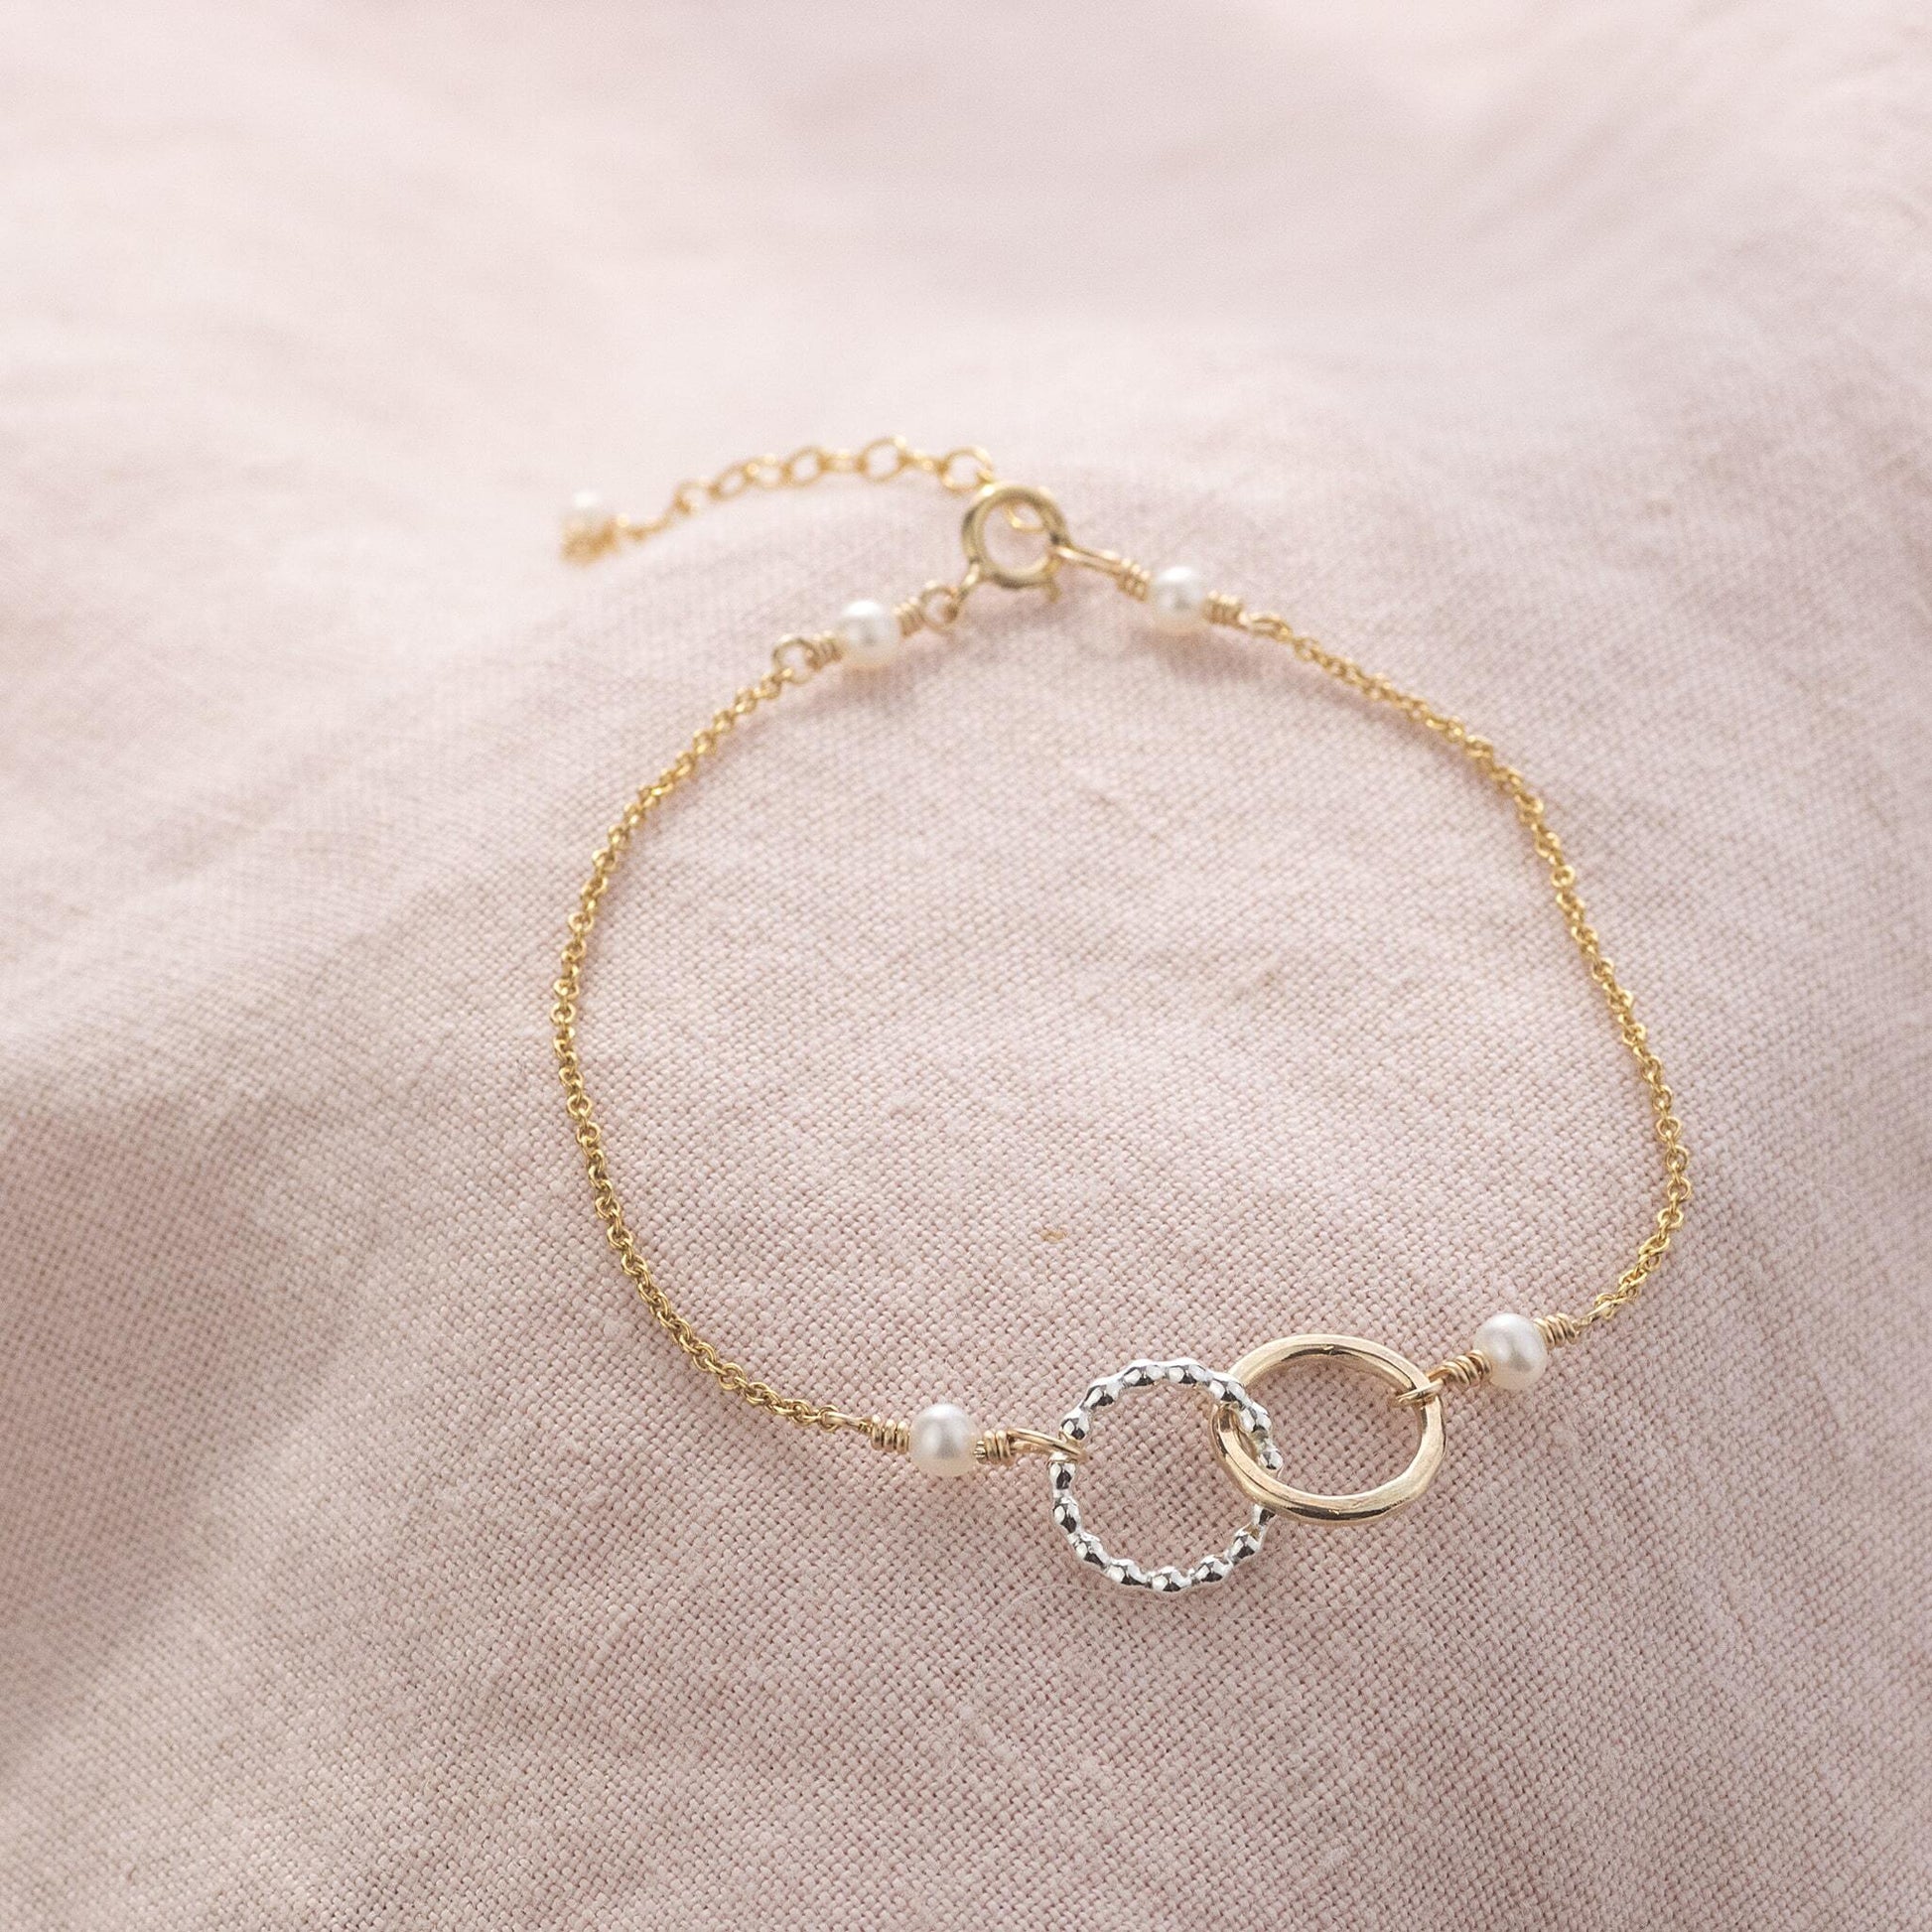 Gift for Friend & Bridesmaid - Love Link Bracelet - Silver & Gold